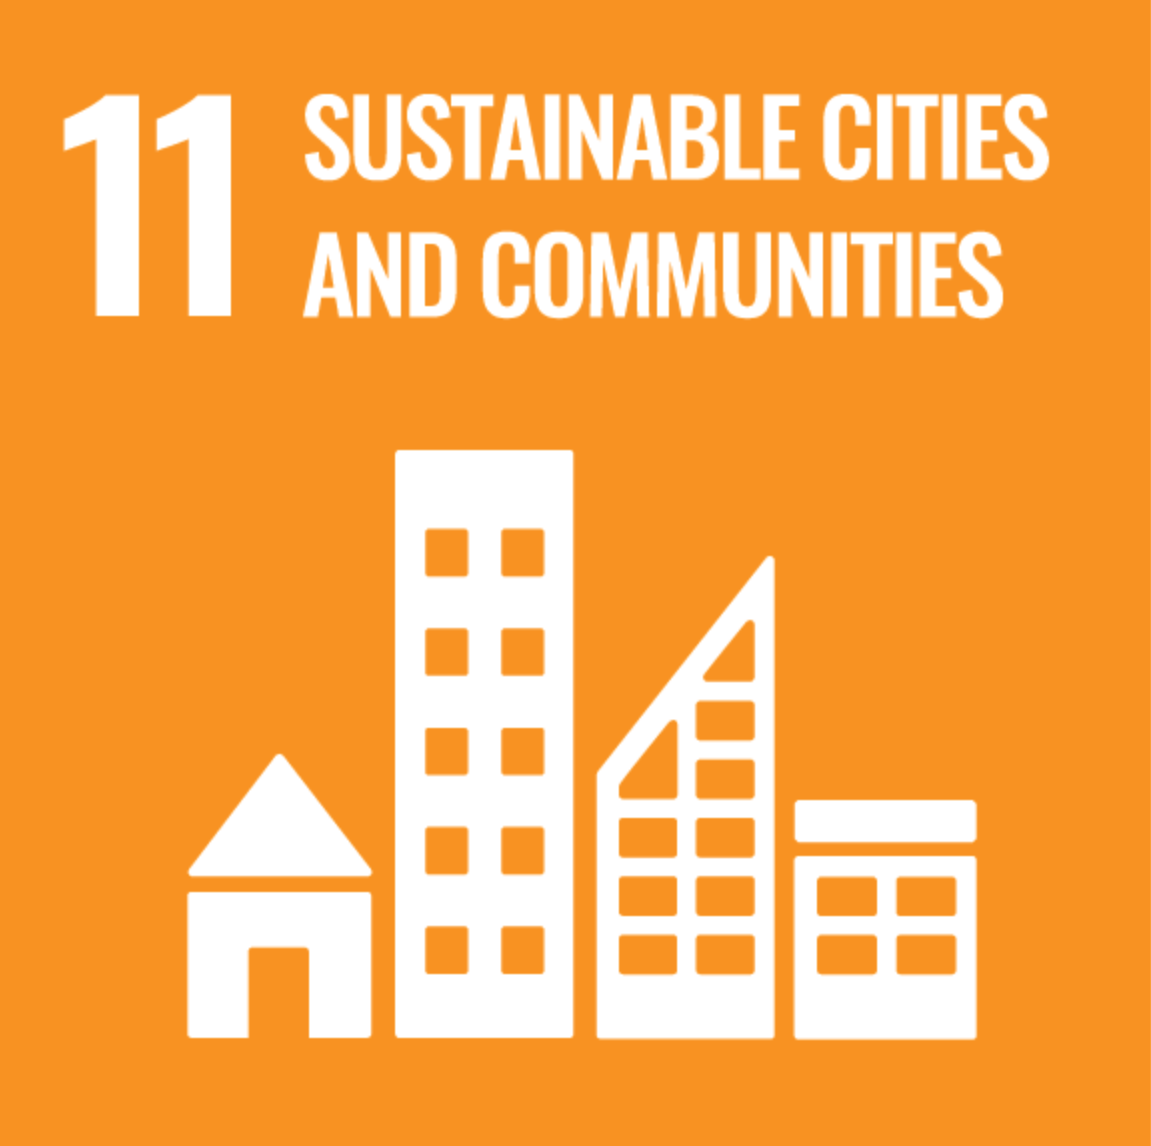 United Nations Sustainable Development Goal 11: Sustainable Cities and Communities